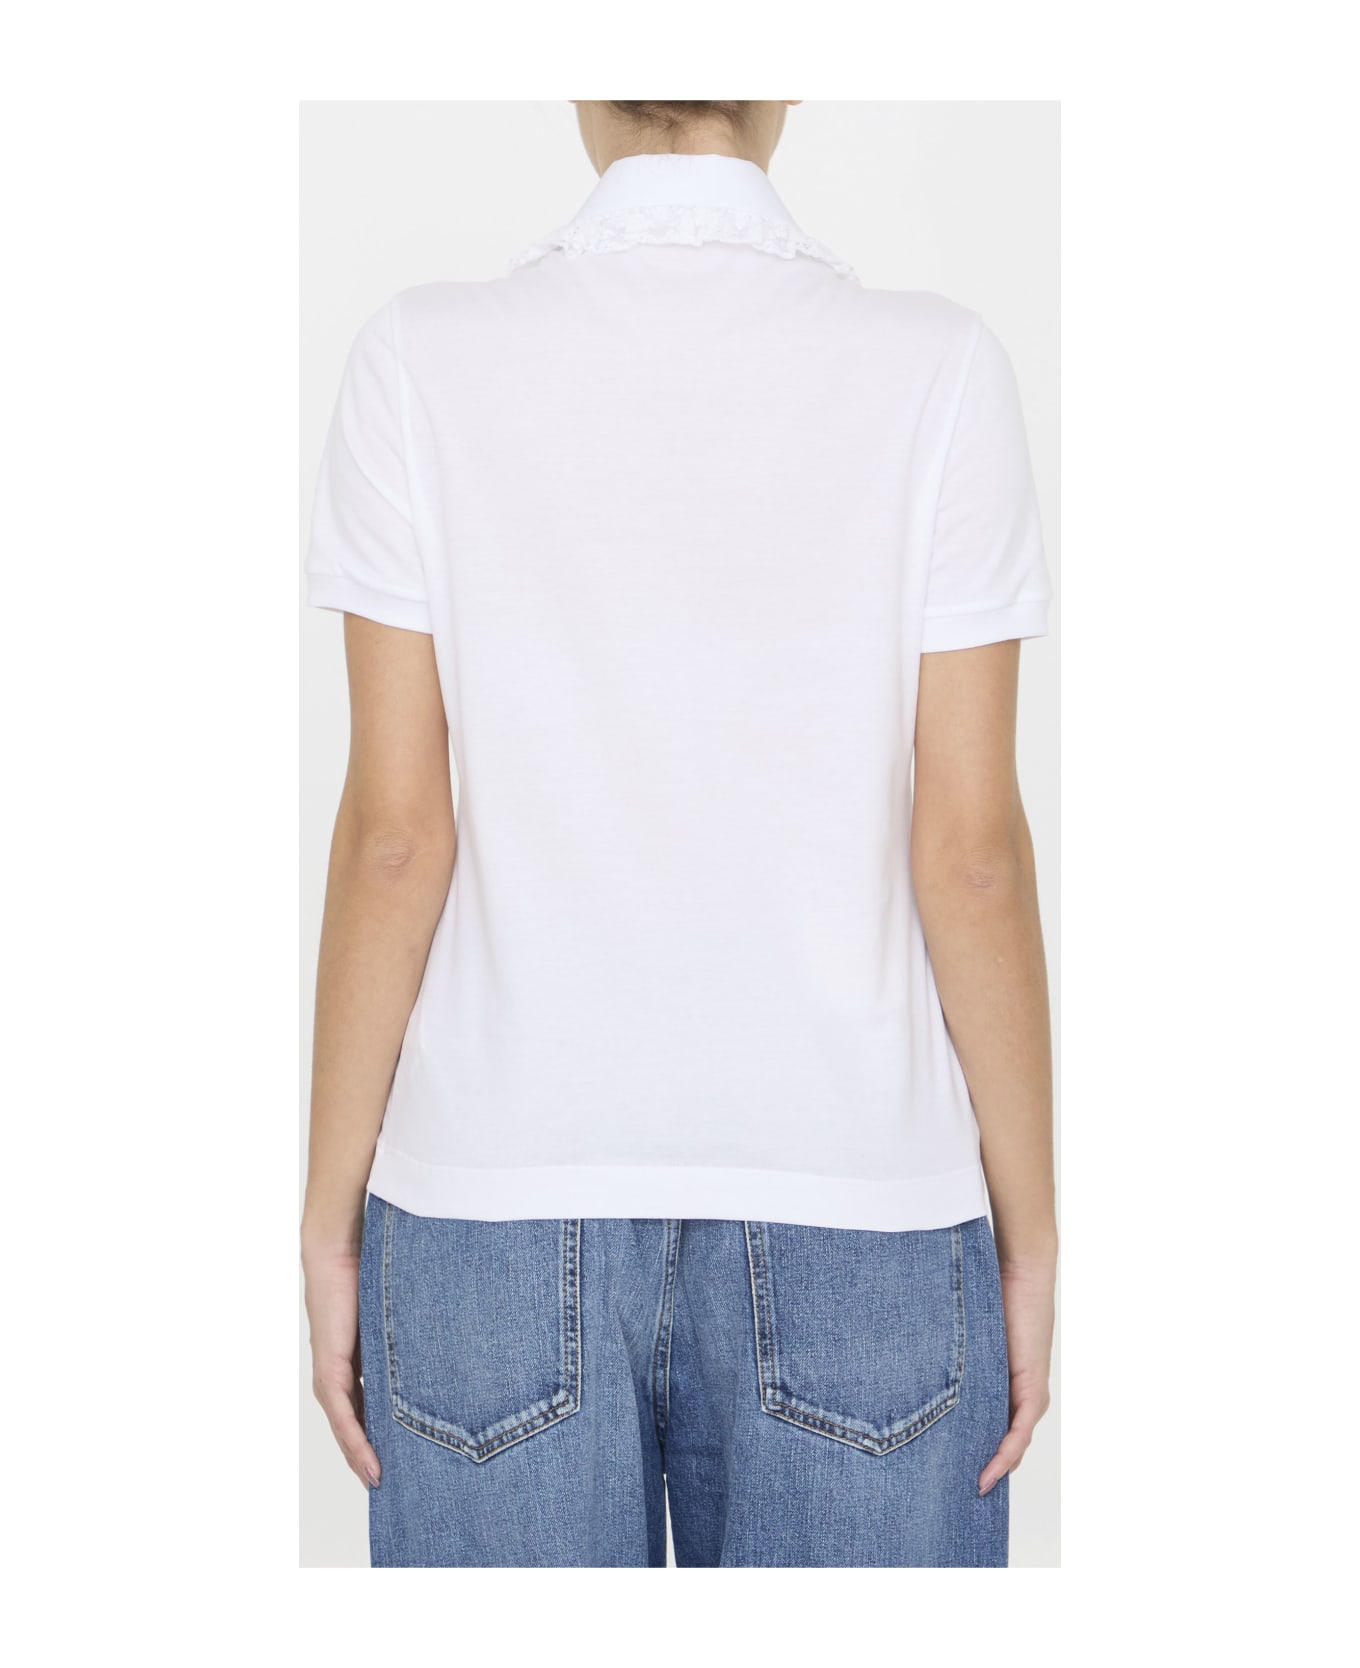 Dolce & Gabbana Cotton T-shirt With Lace - WHITE Tシャツ